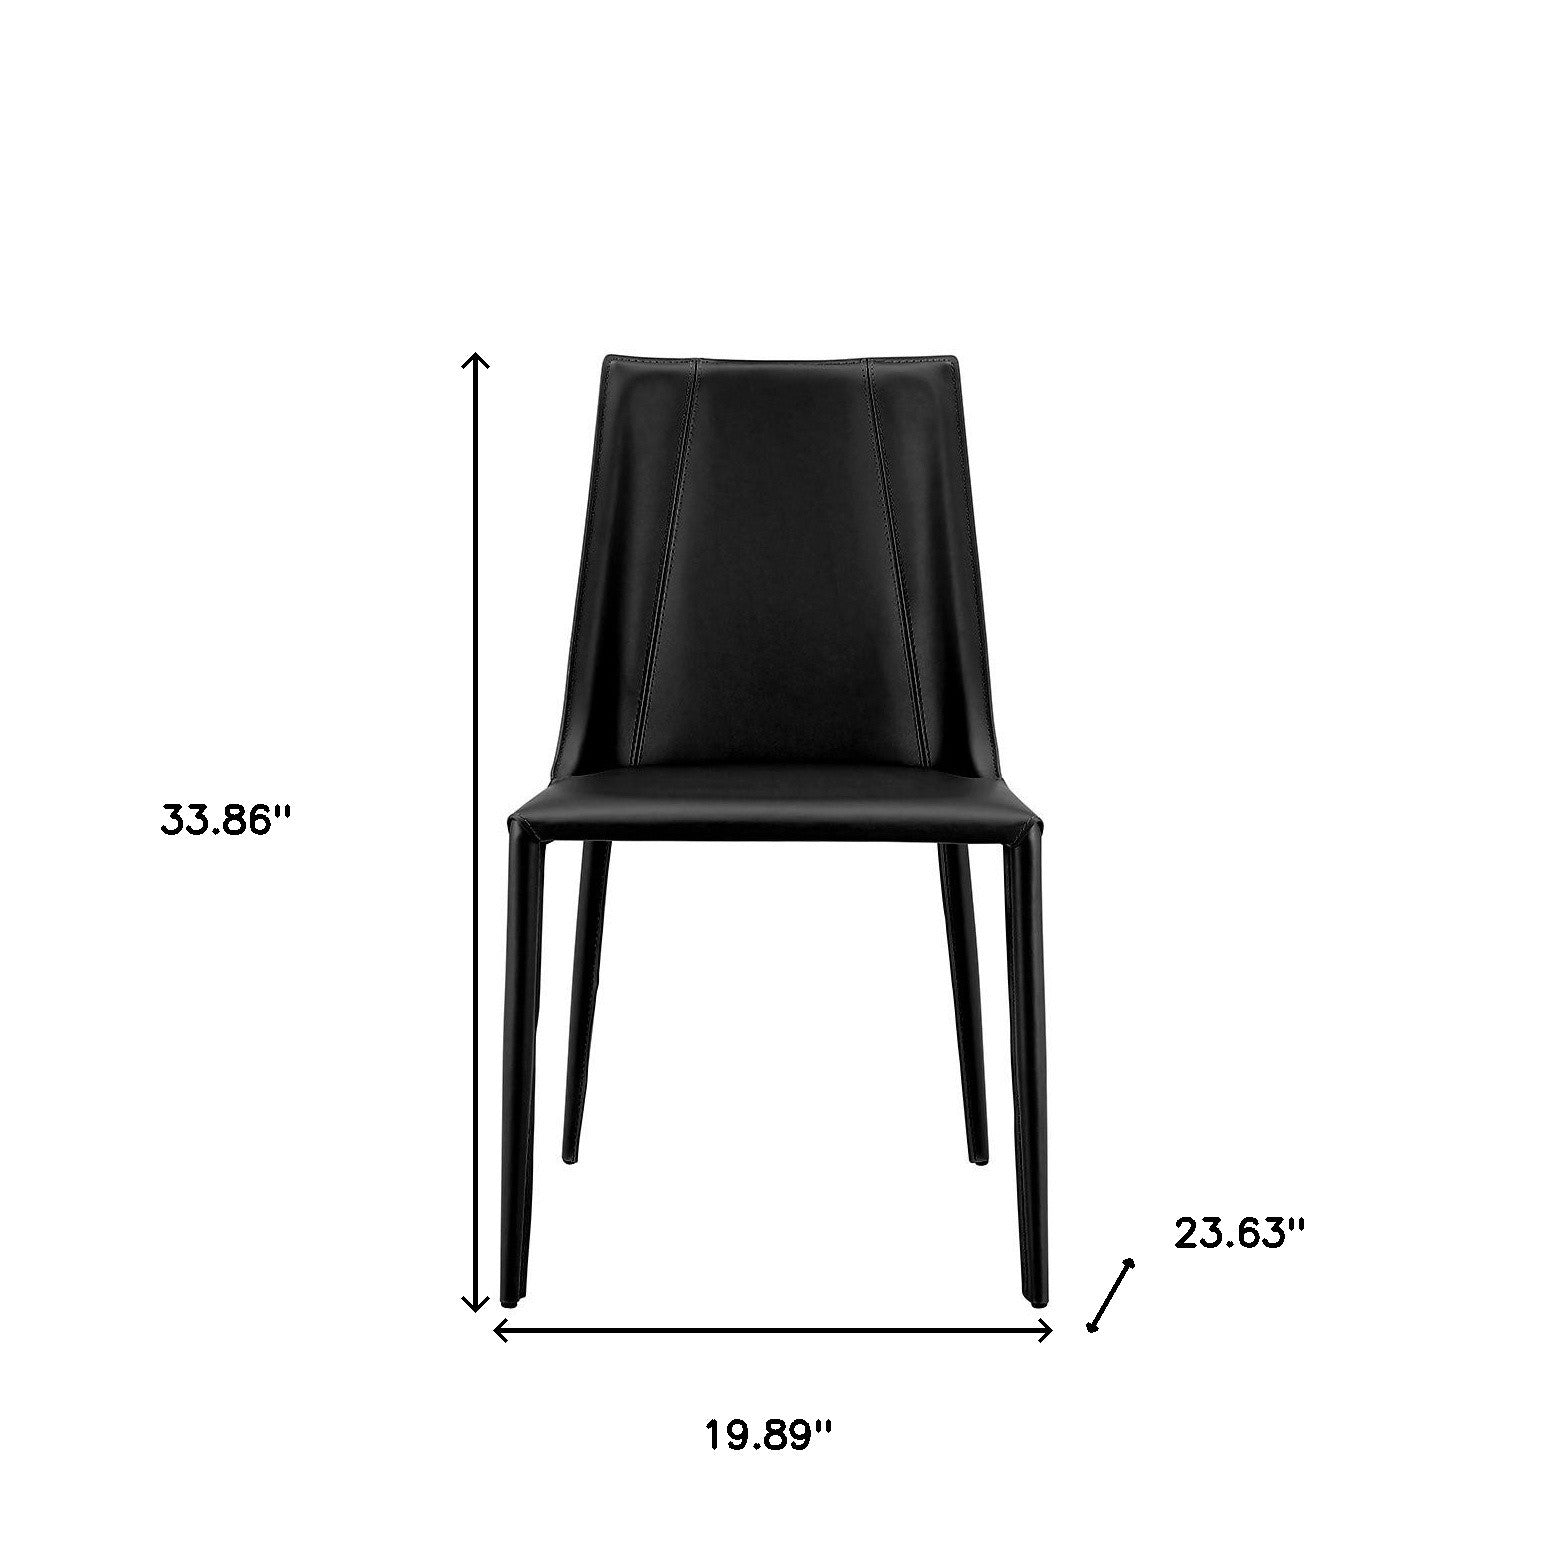 Sleek All Black Faux Leather Dining or Side Chair